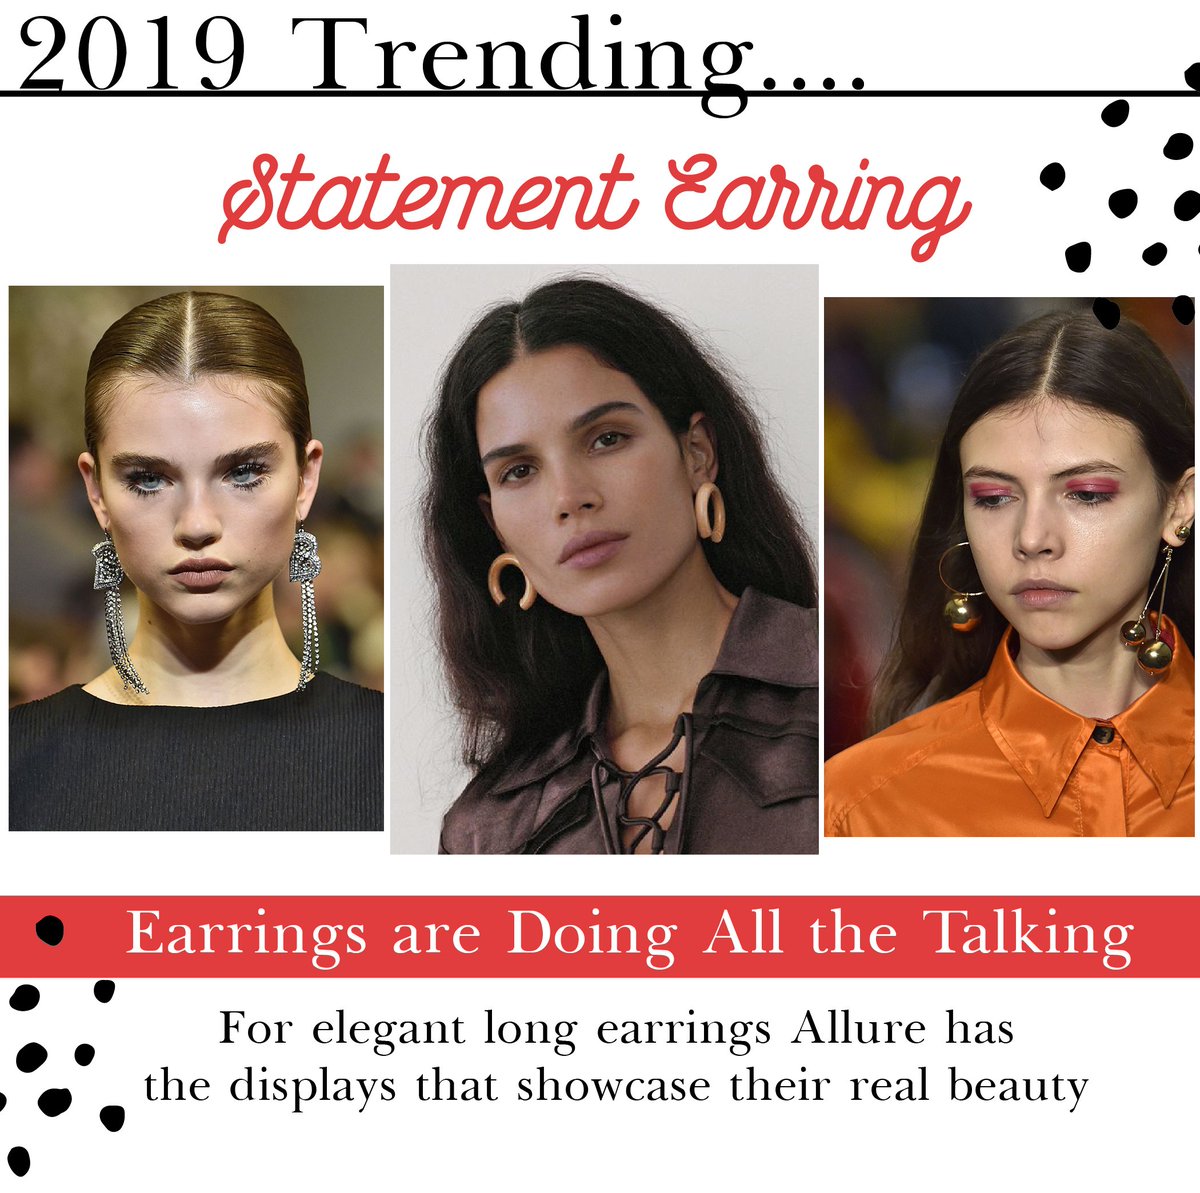 Top Earring Trends! Displayed with a WOW Click here for earring displays allurepack.com/collections/di…
#longearring #earrings #statementEarrings #earringDisplays #jewelryDisplay #EarringTree #Jewelrytrends #fineJewelry #Allurebox